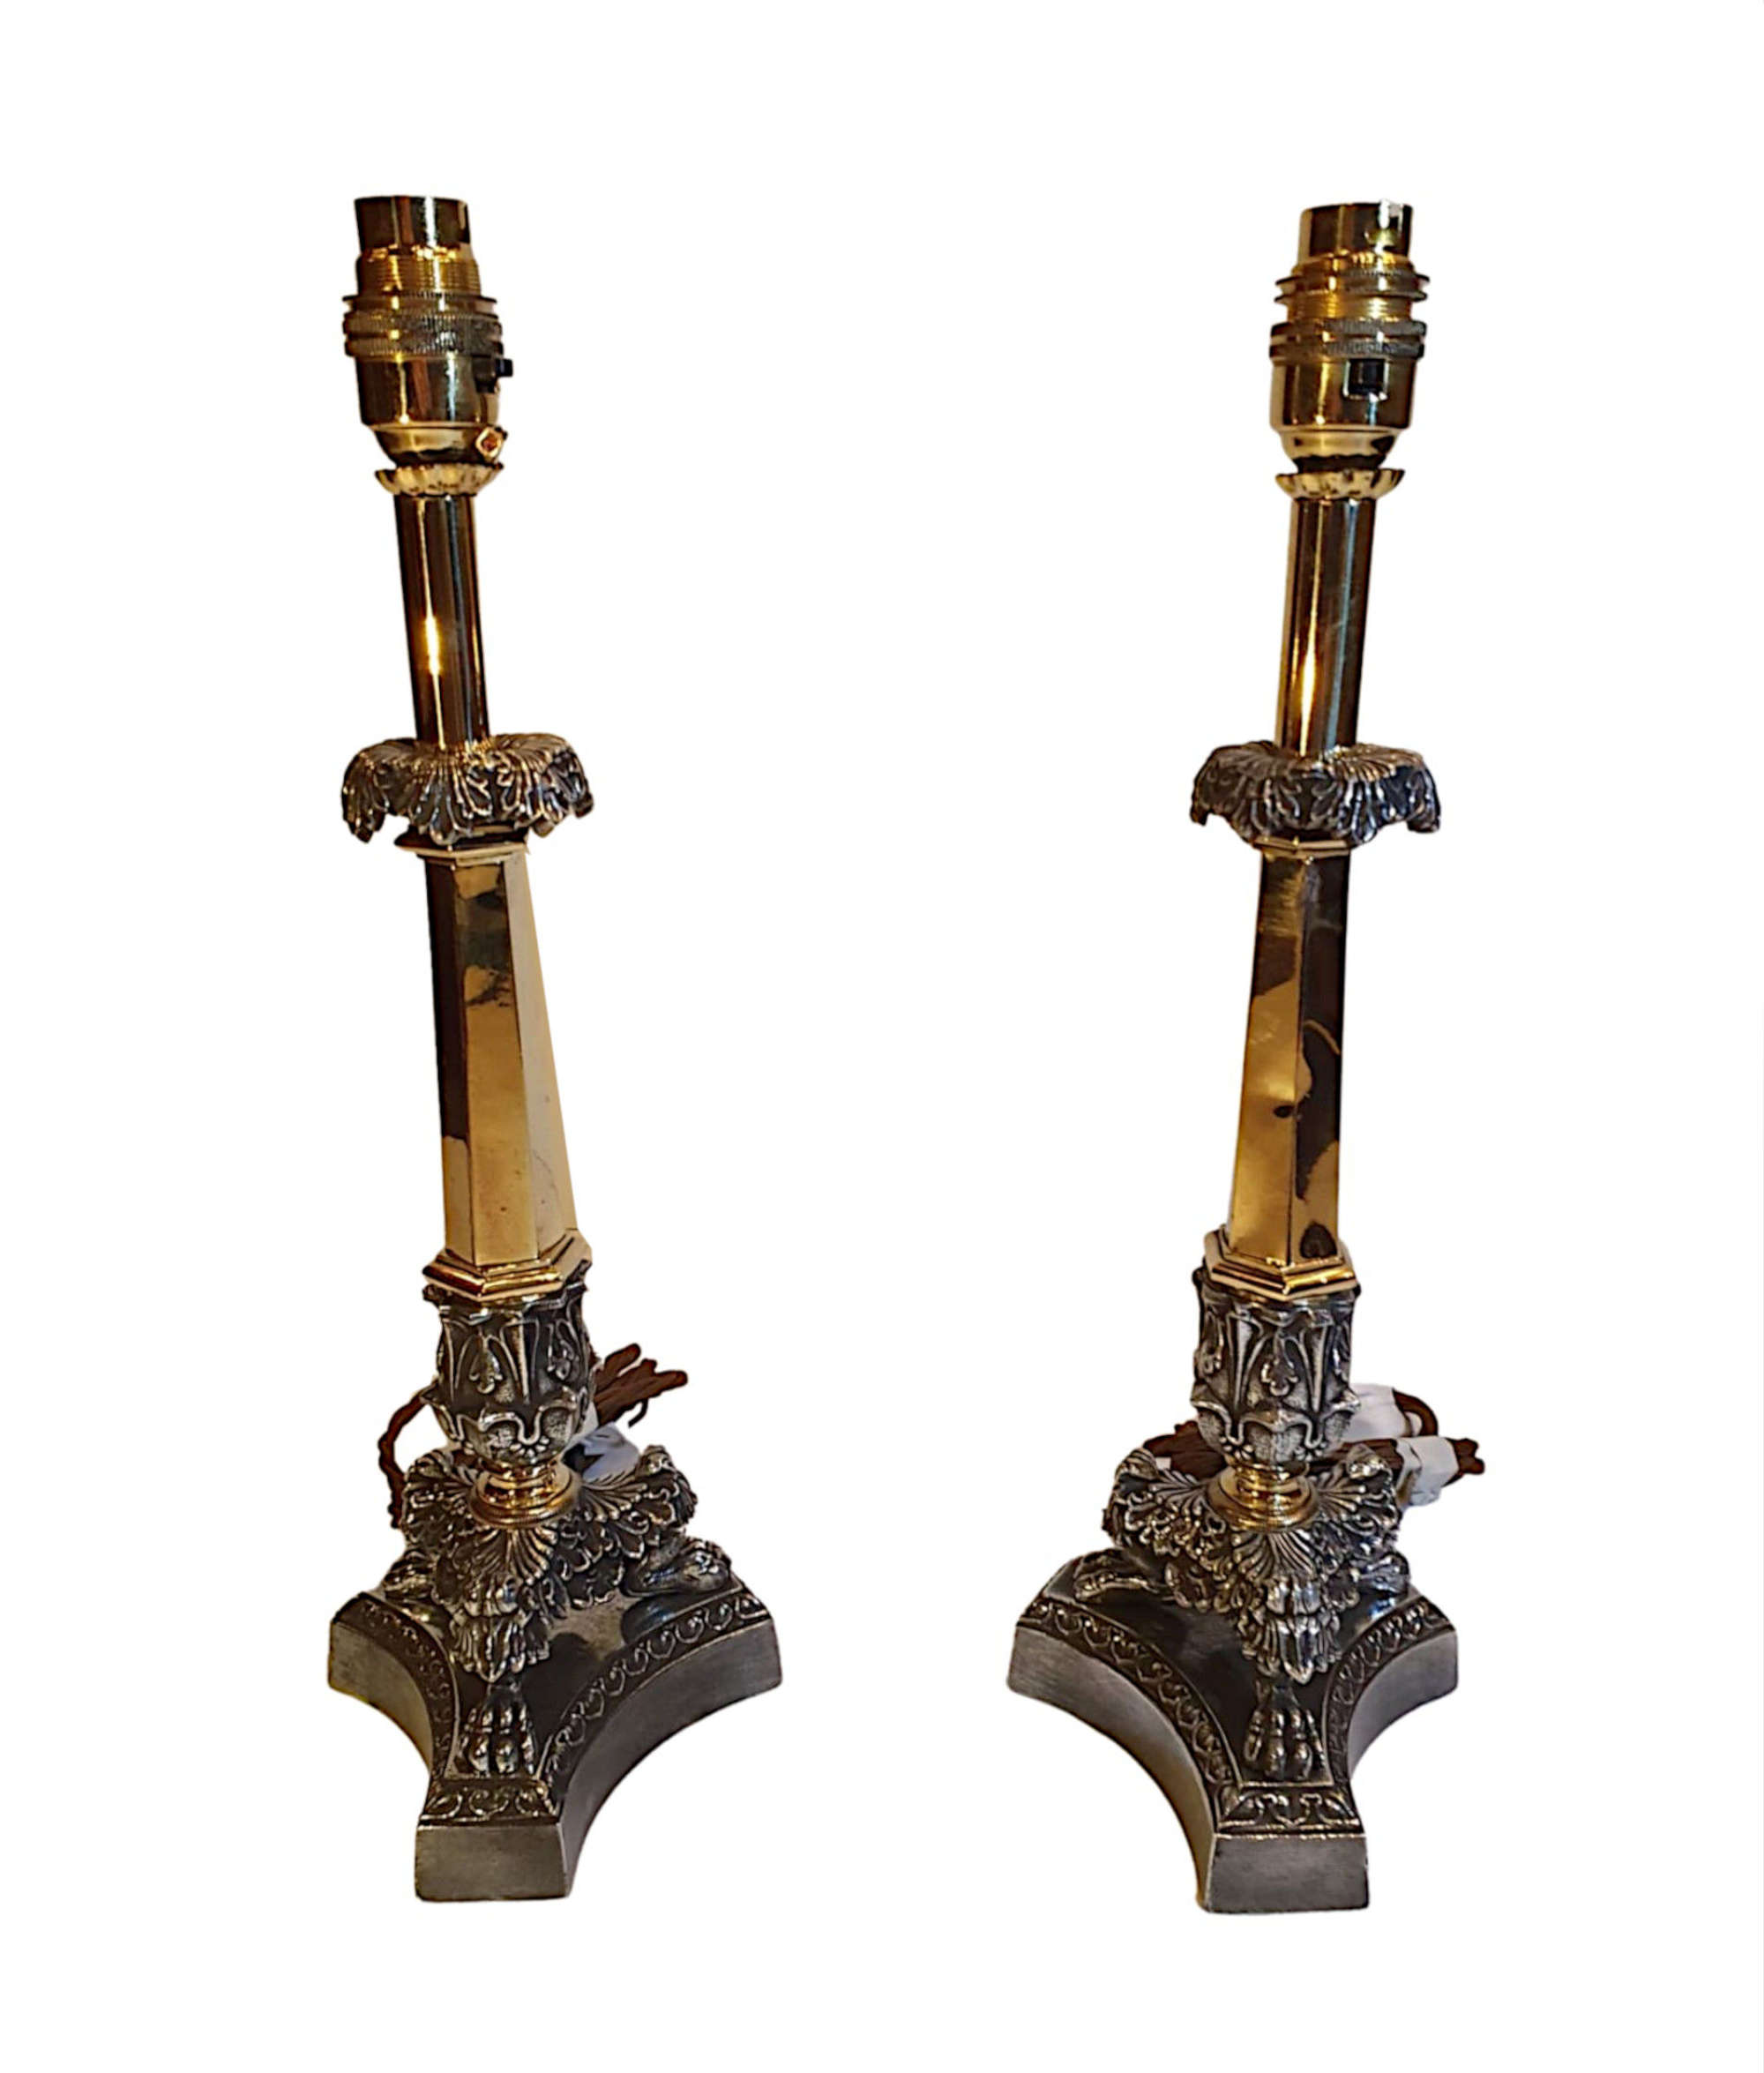 Pair 19th Century Empire Style Candlesticks Converted To Antique Table Lamps